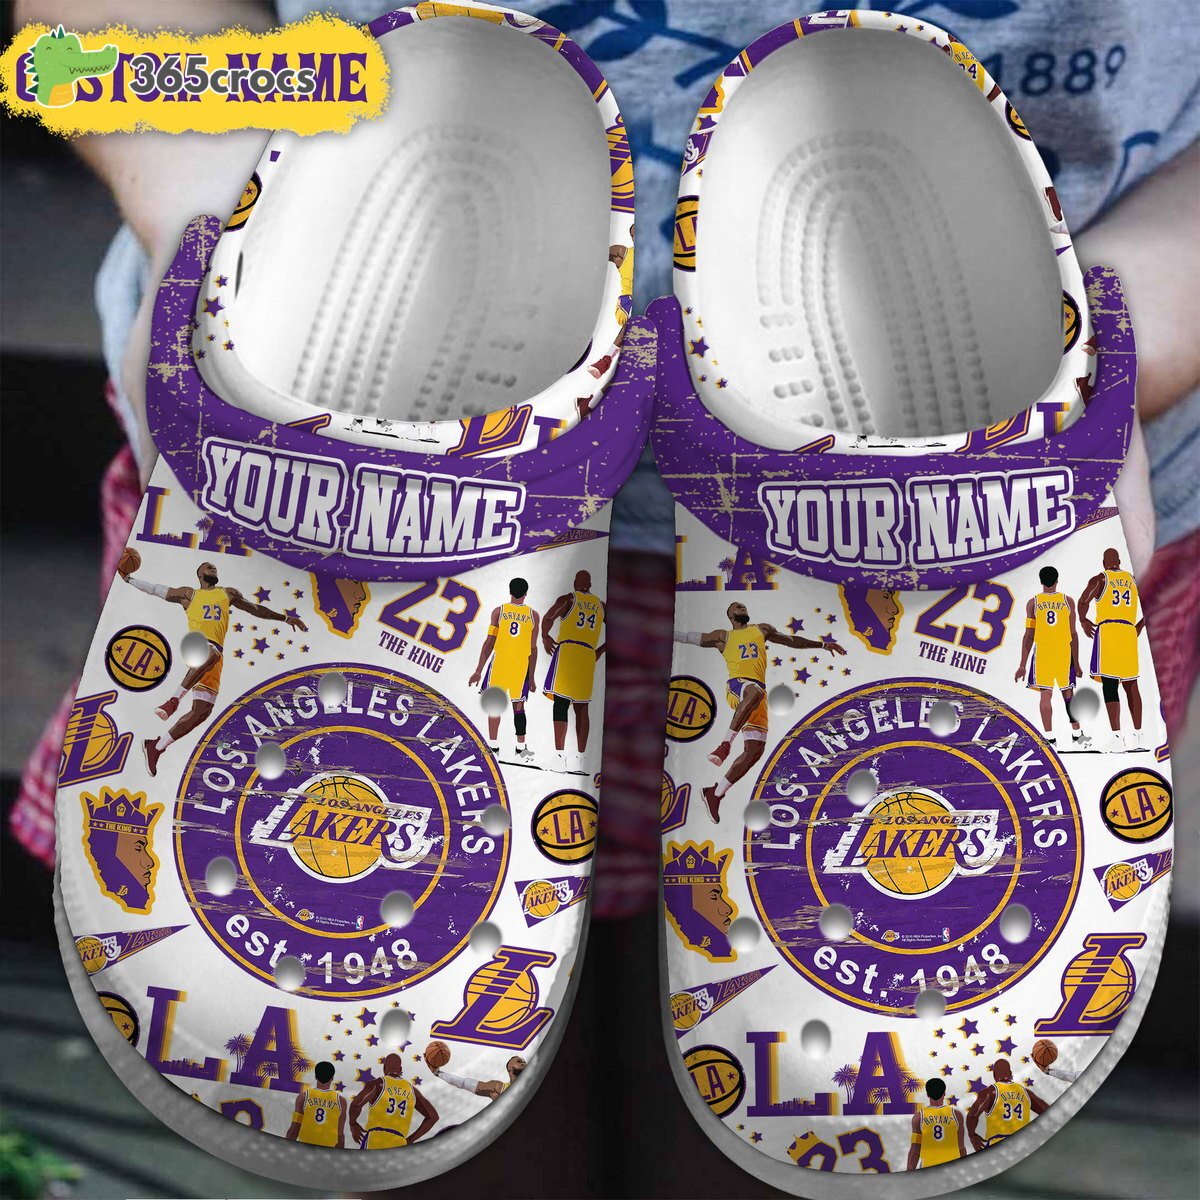 Los Angeles Lakers NBA Sport Edition Three Comfortable Crocss Clogs Shoes Basketball